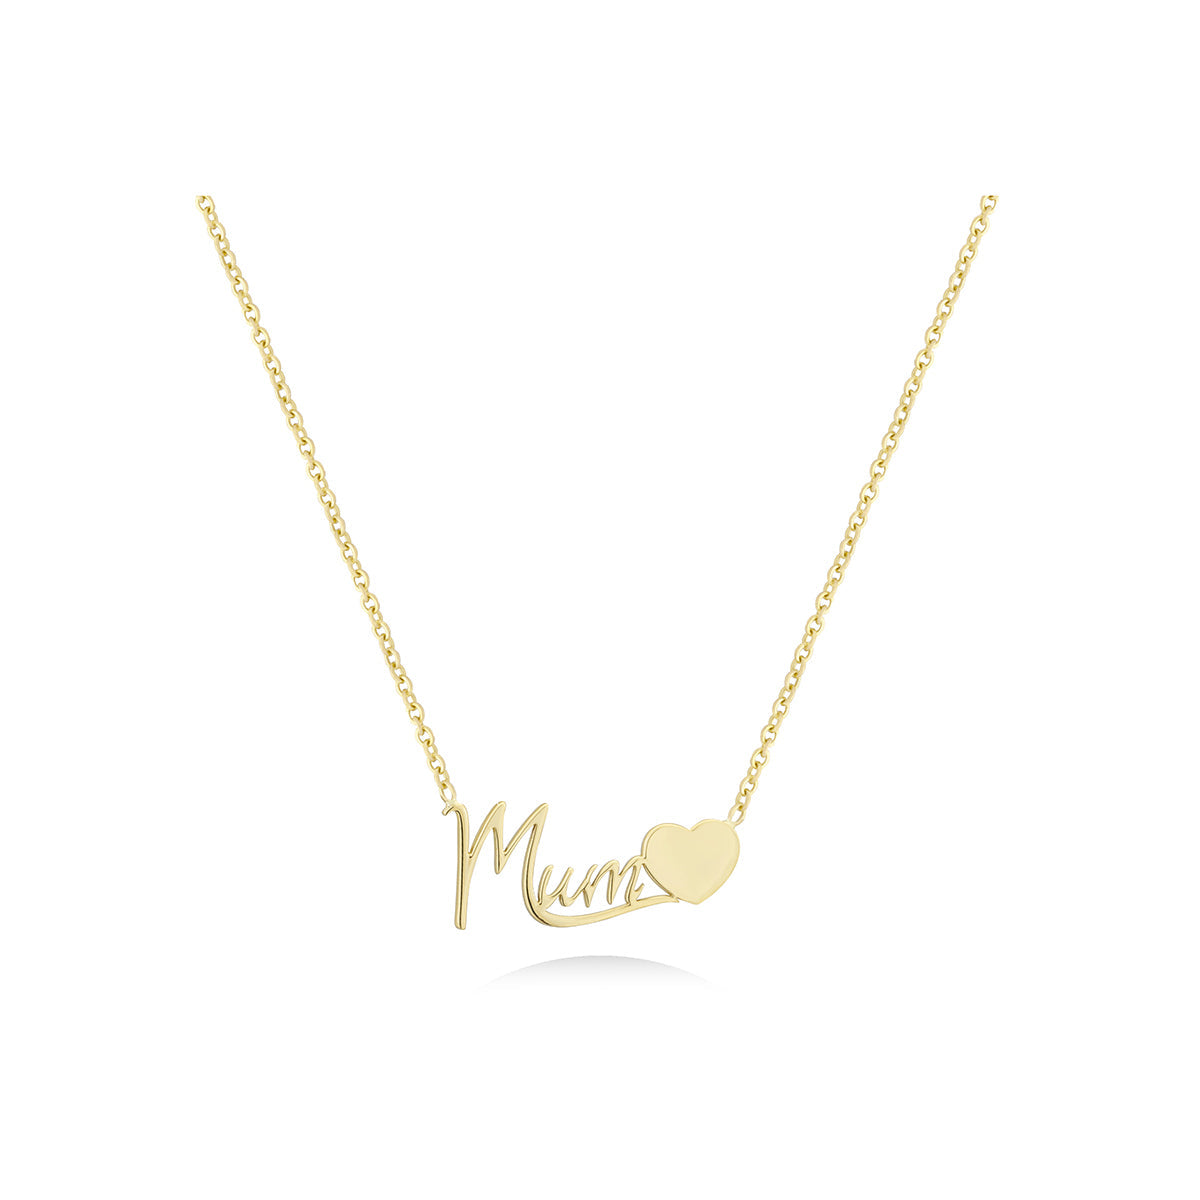 Mum Necklace in 18k Yellow Gold